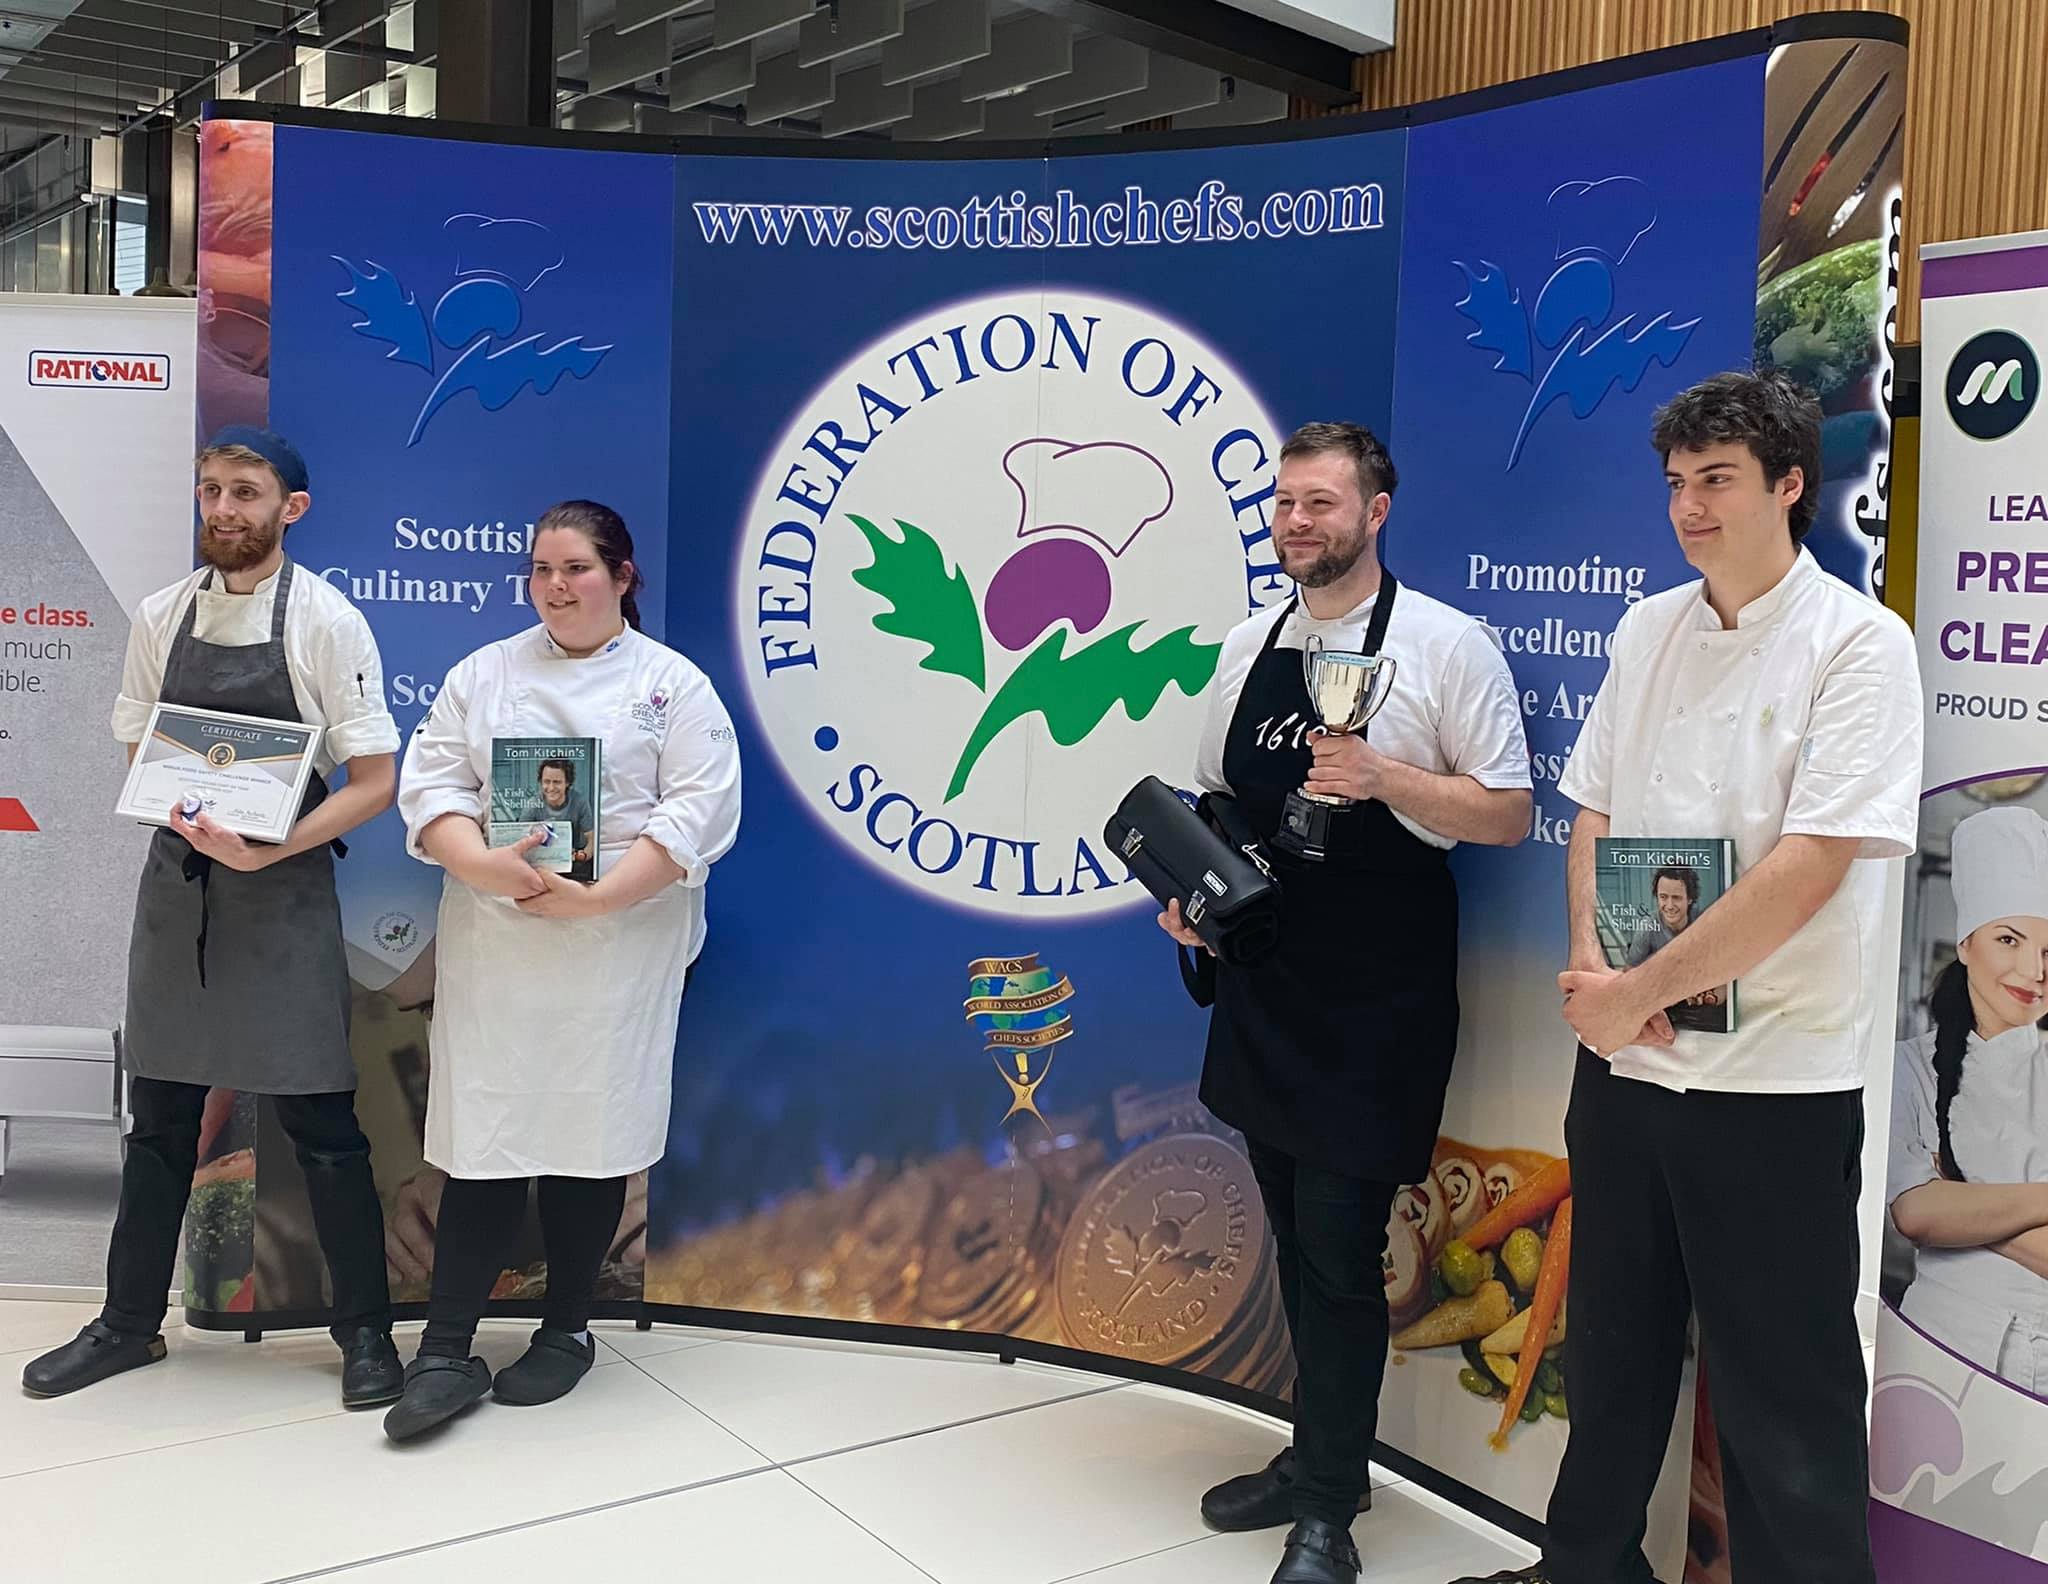 Group shot of the finalists of the 2021 Young Scottish Chef Of The Year